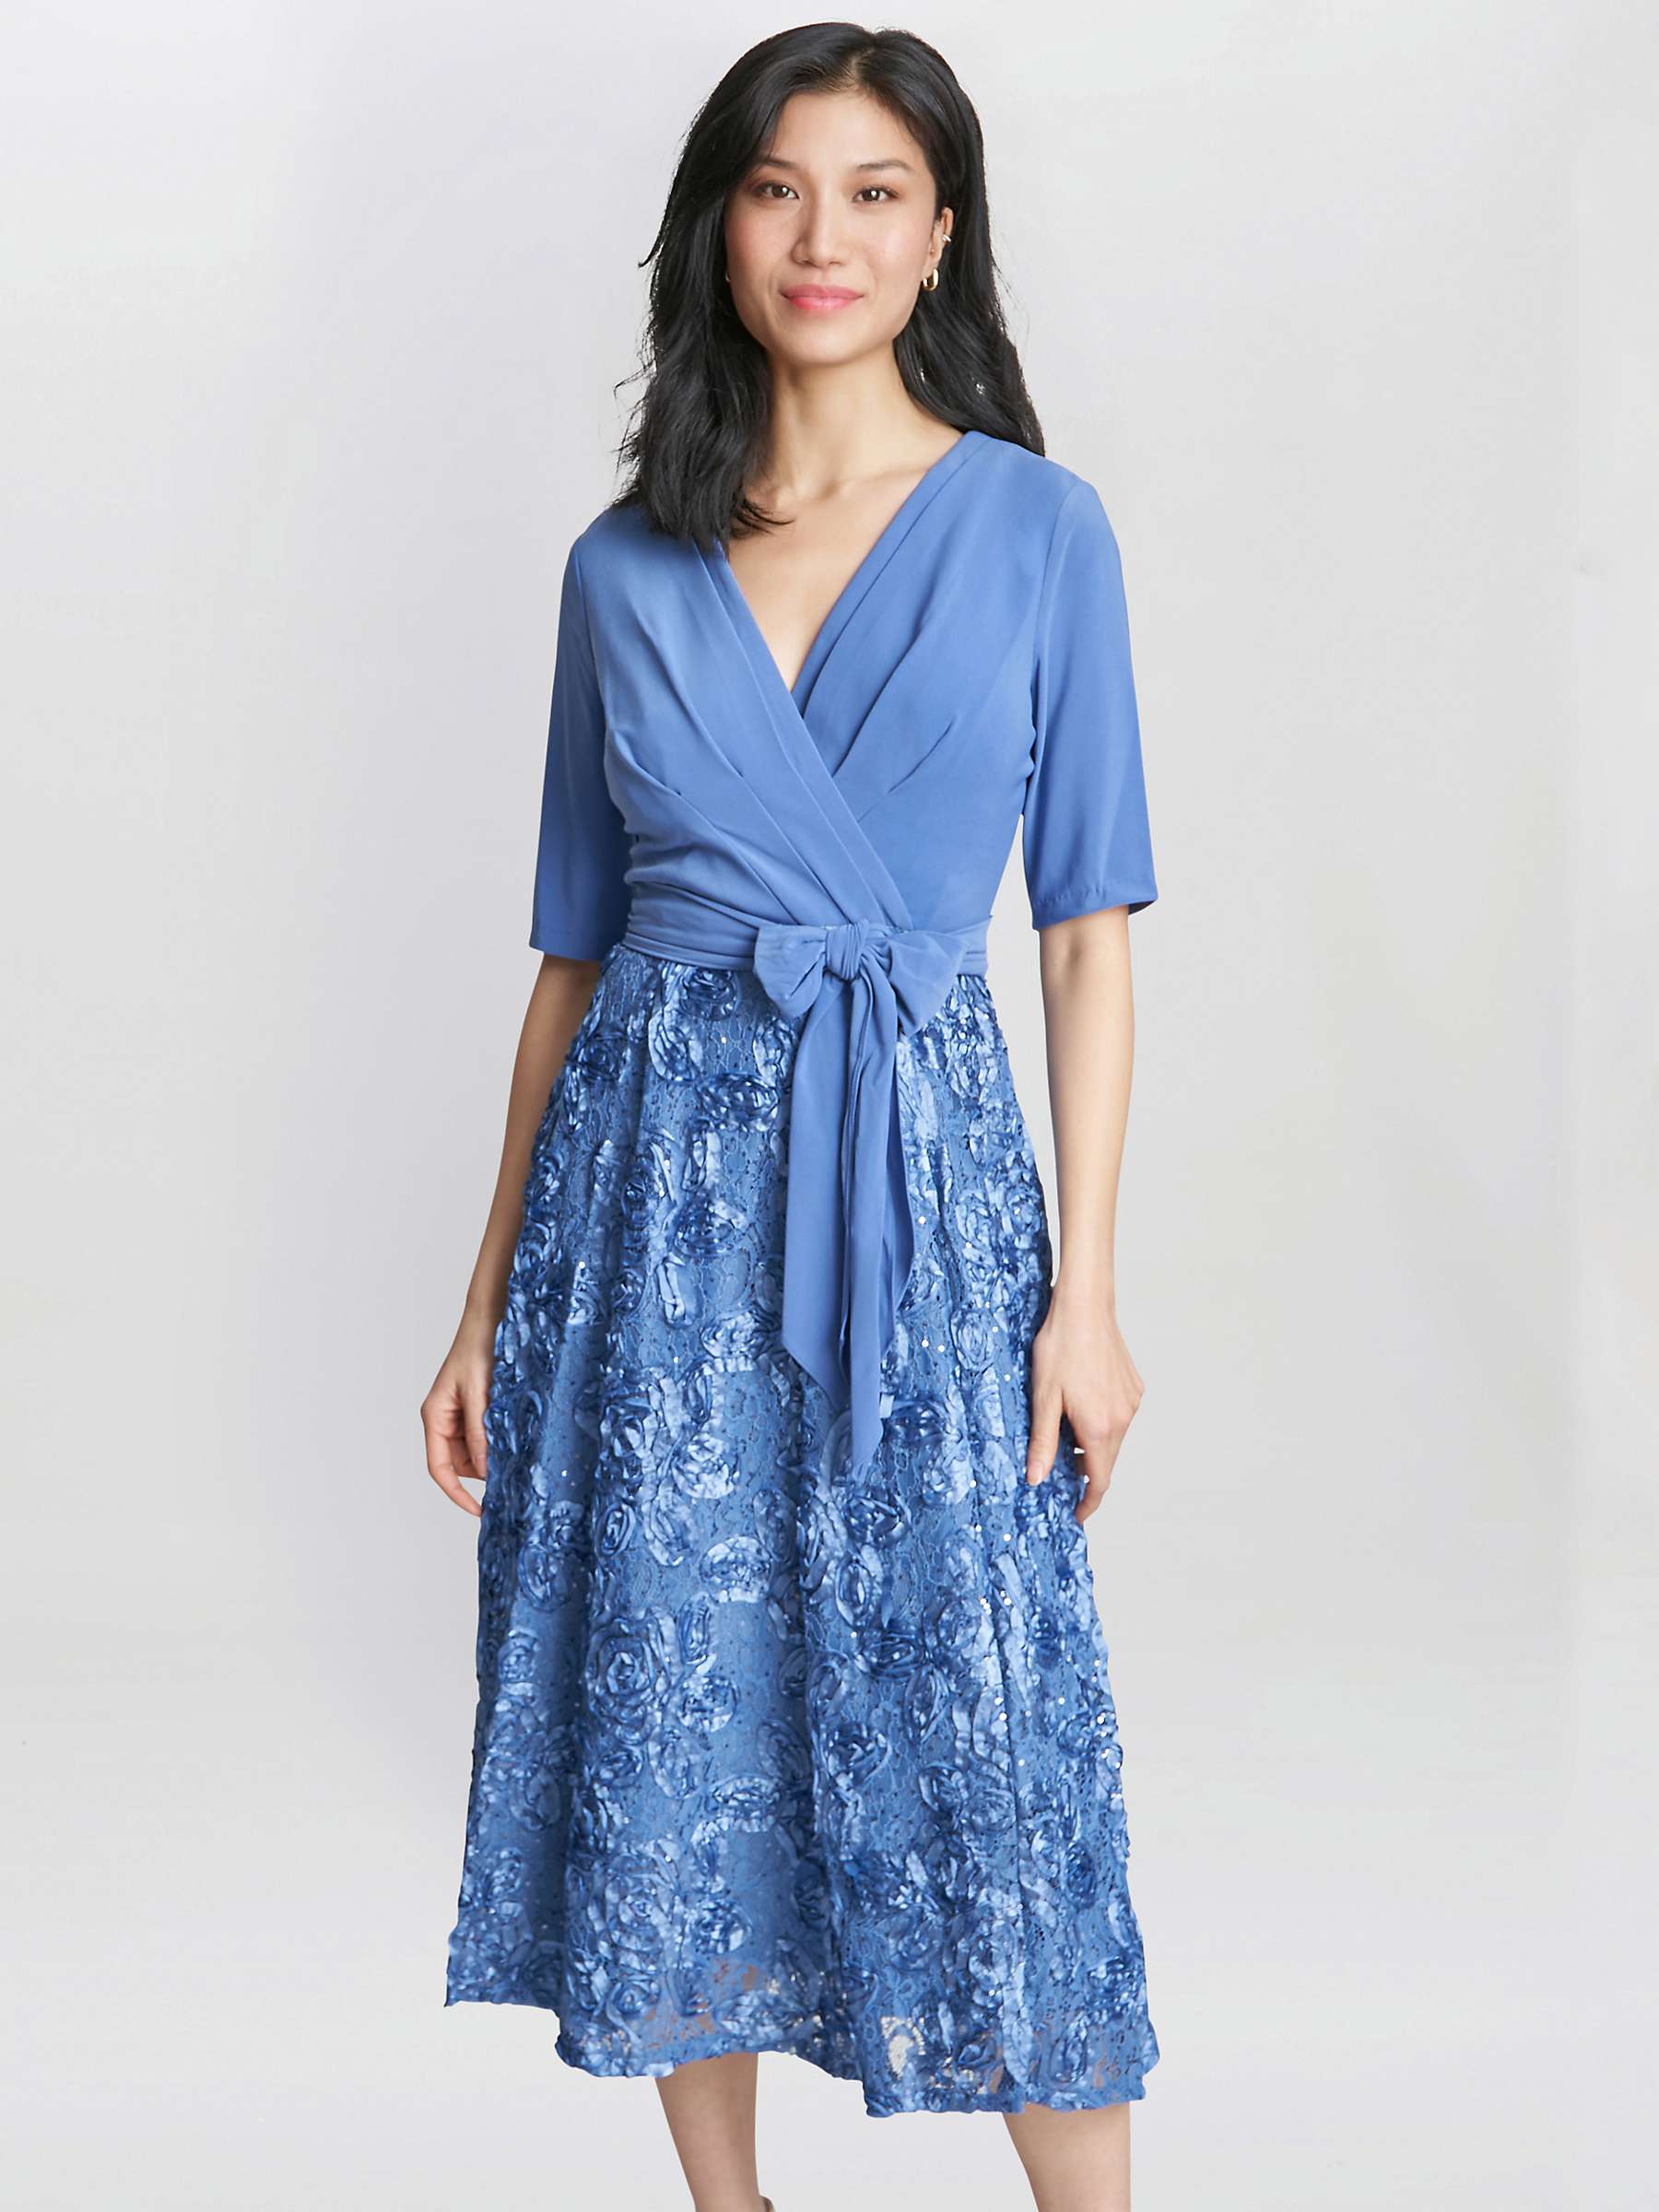 Buy Gina Bacconi Arlene Lace and Jersey Midi Cocktail Dress, Perri Online at johnlewis.com